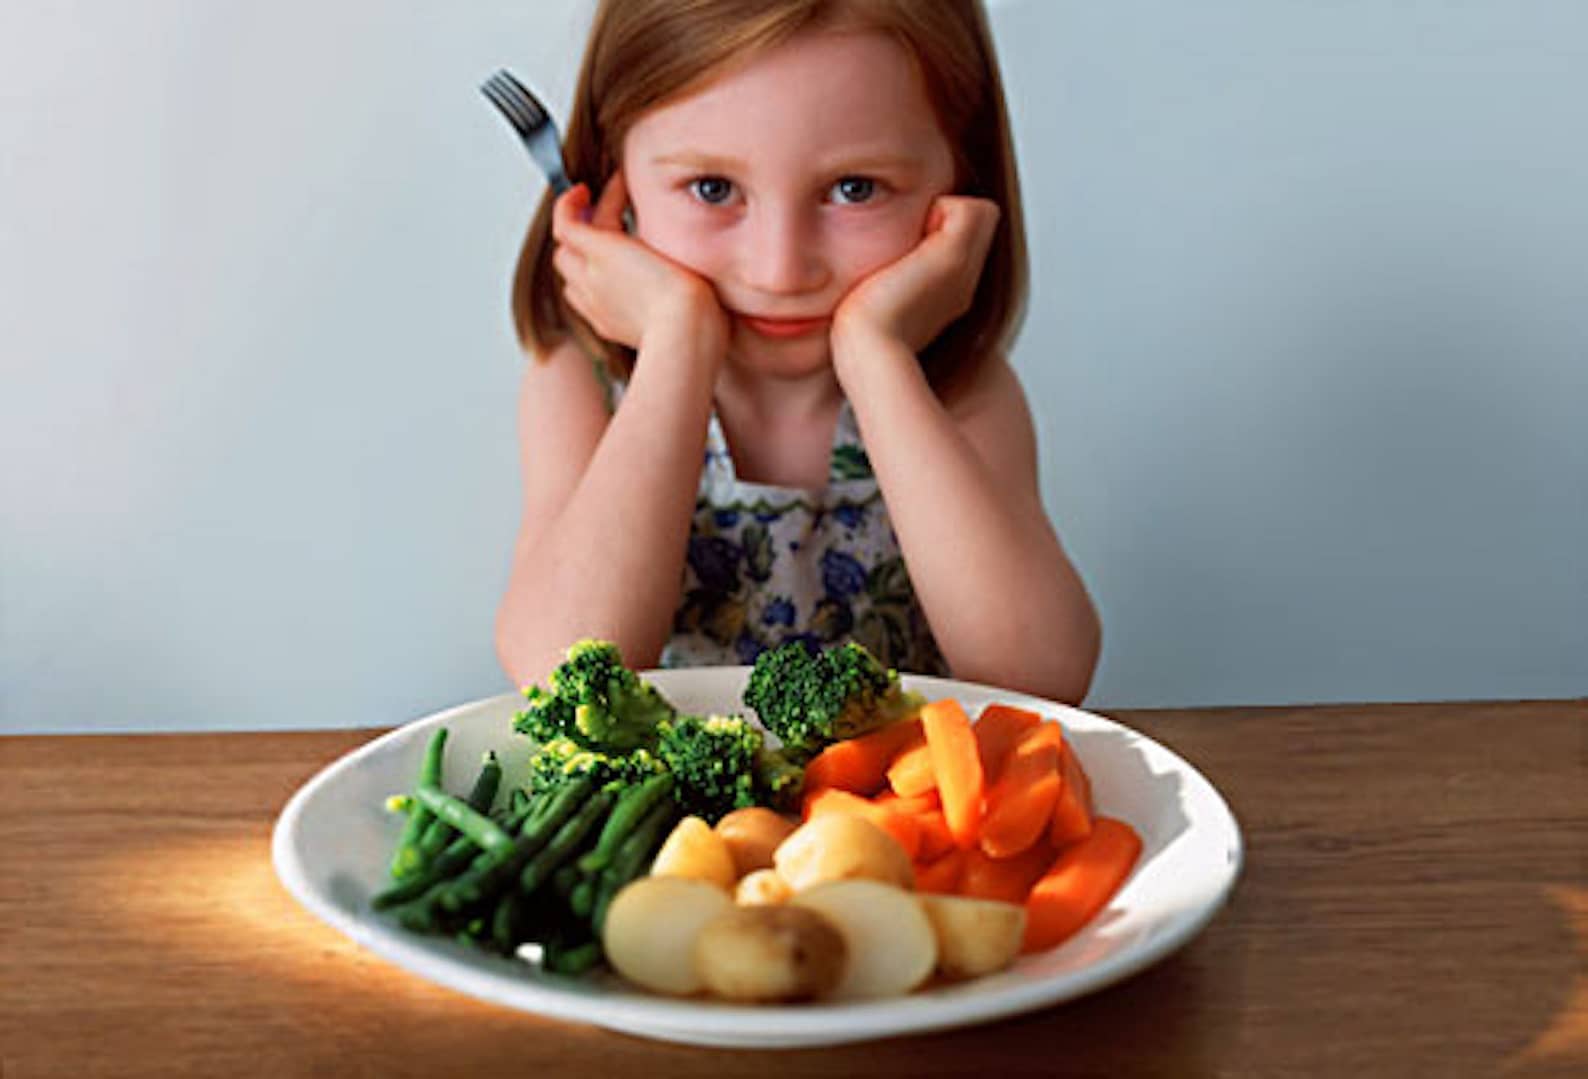 Little girl hesitant in front of a vegetables plate